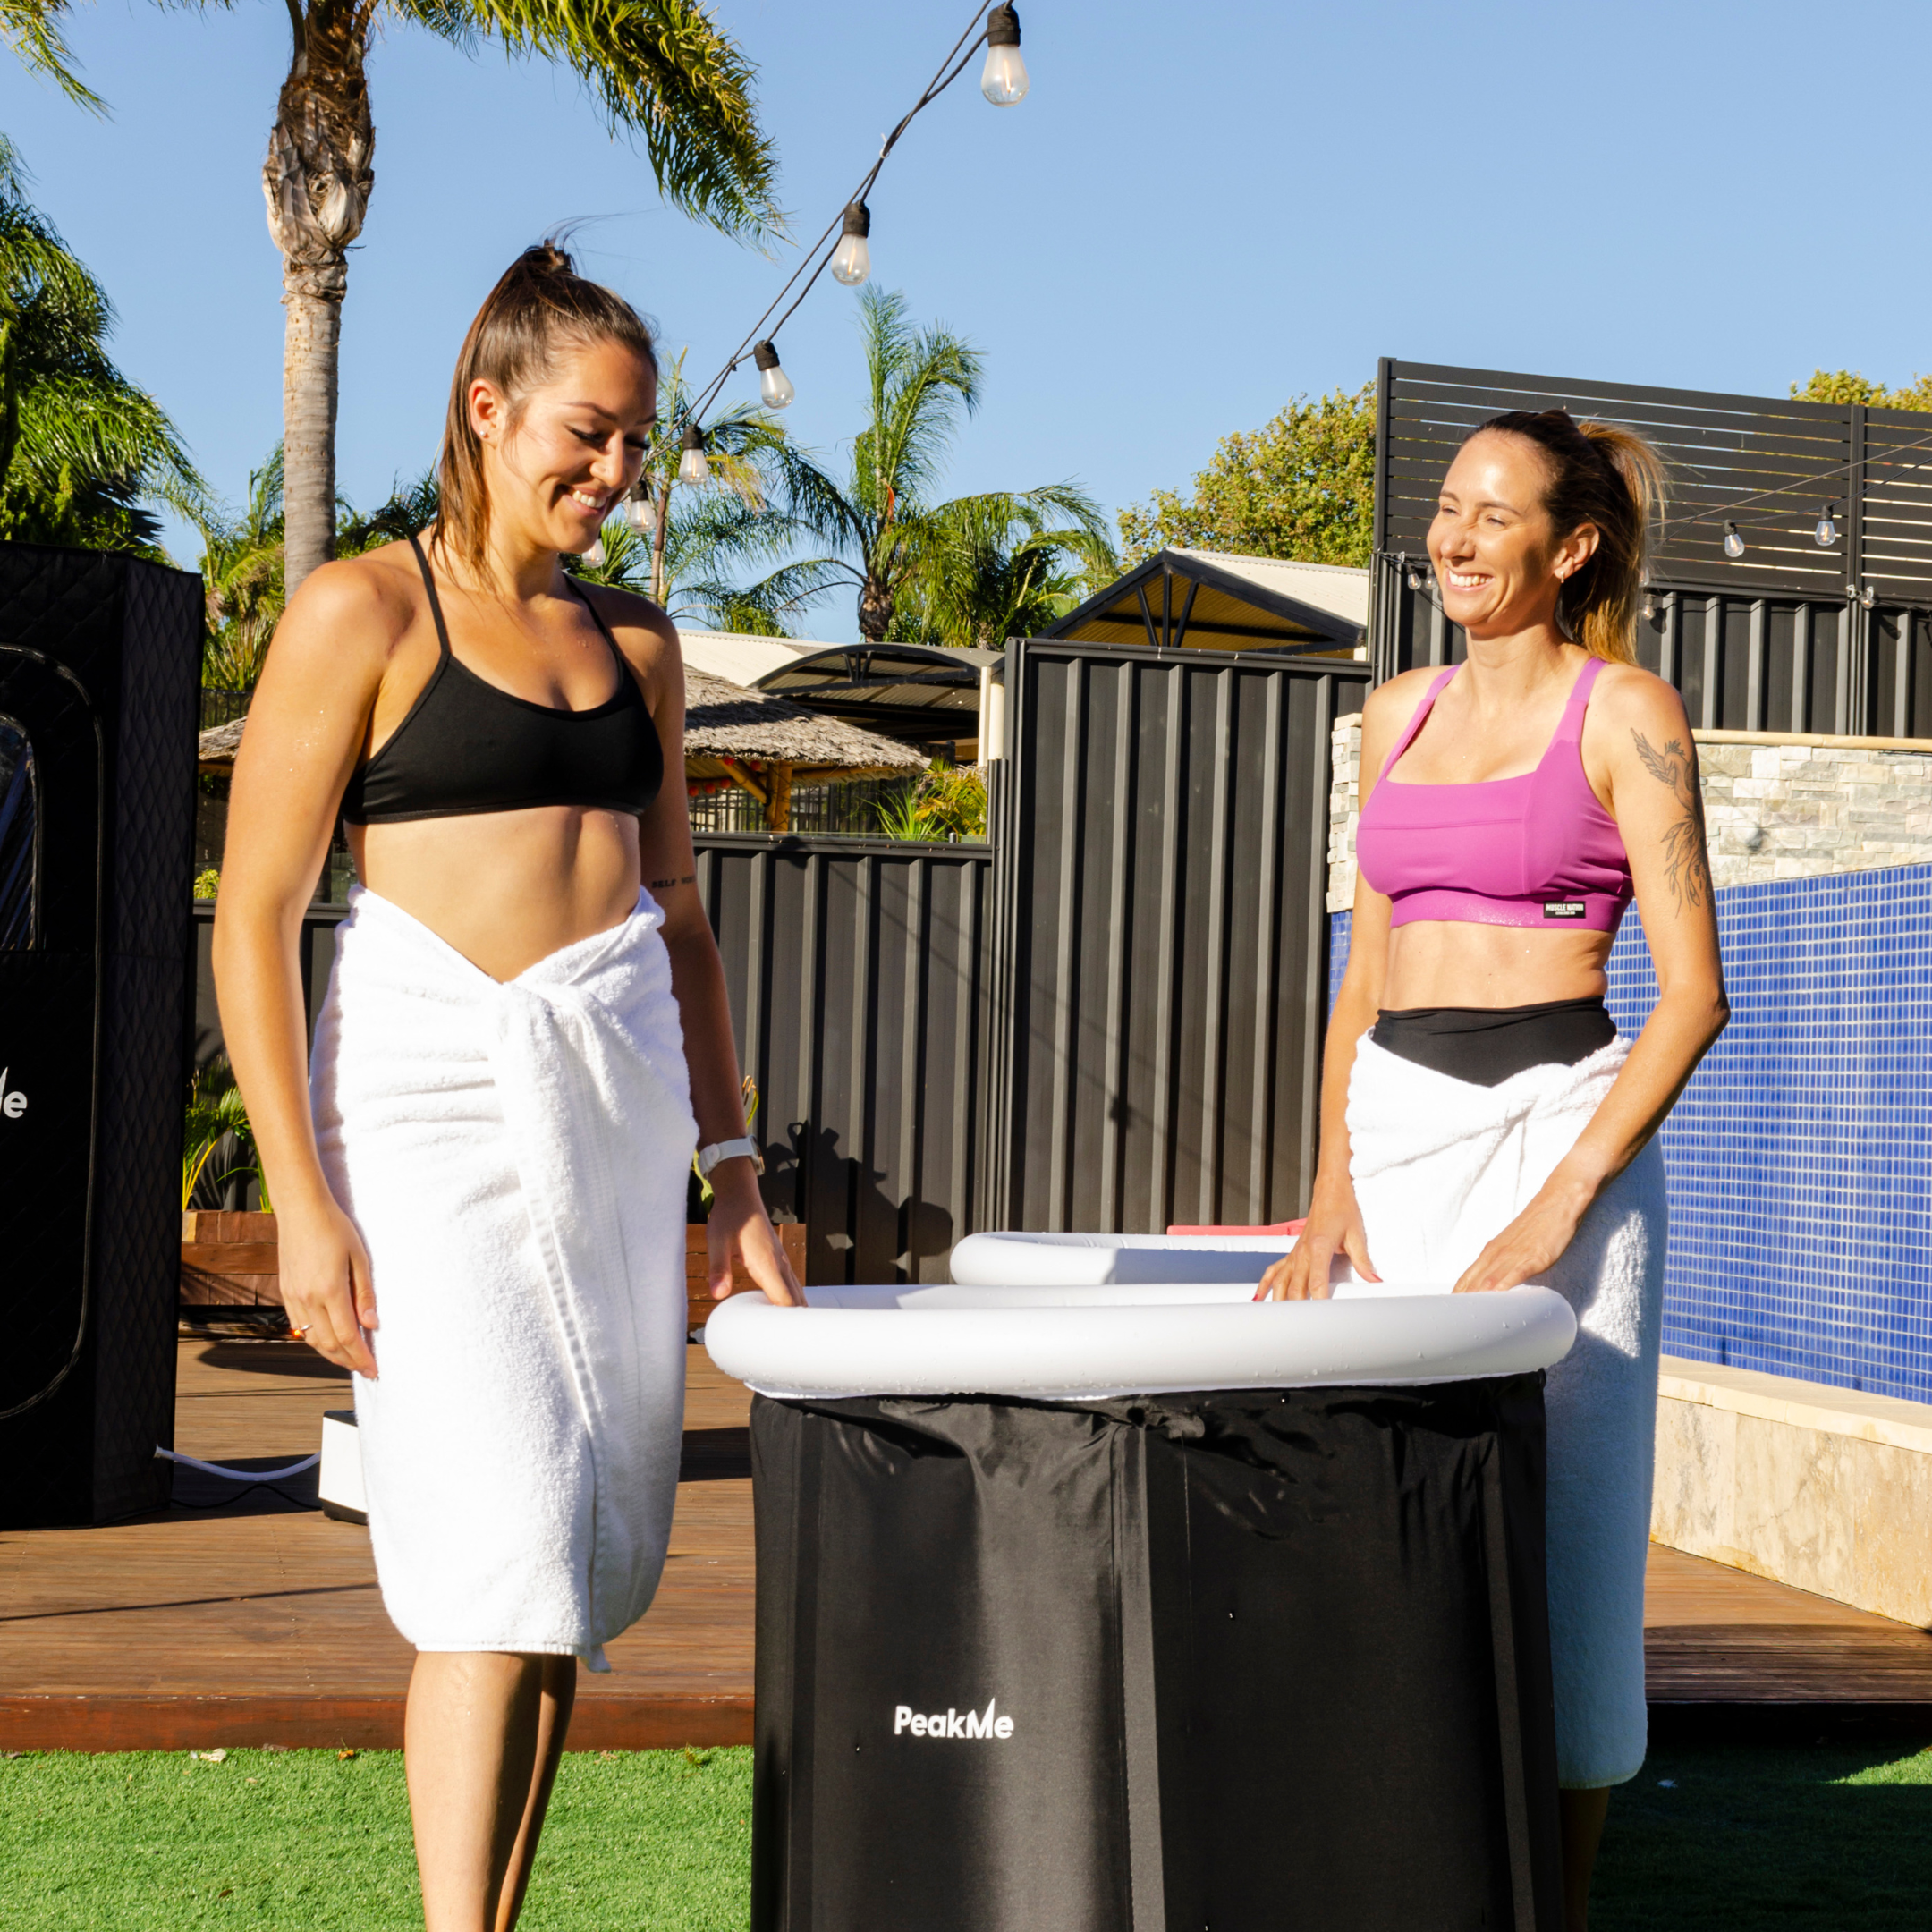 Two smiling women in activewear next to a portable PeakMe ice bath, preparing for cold therapy in an outdoor setting, promoting recovery and wellness.